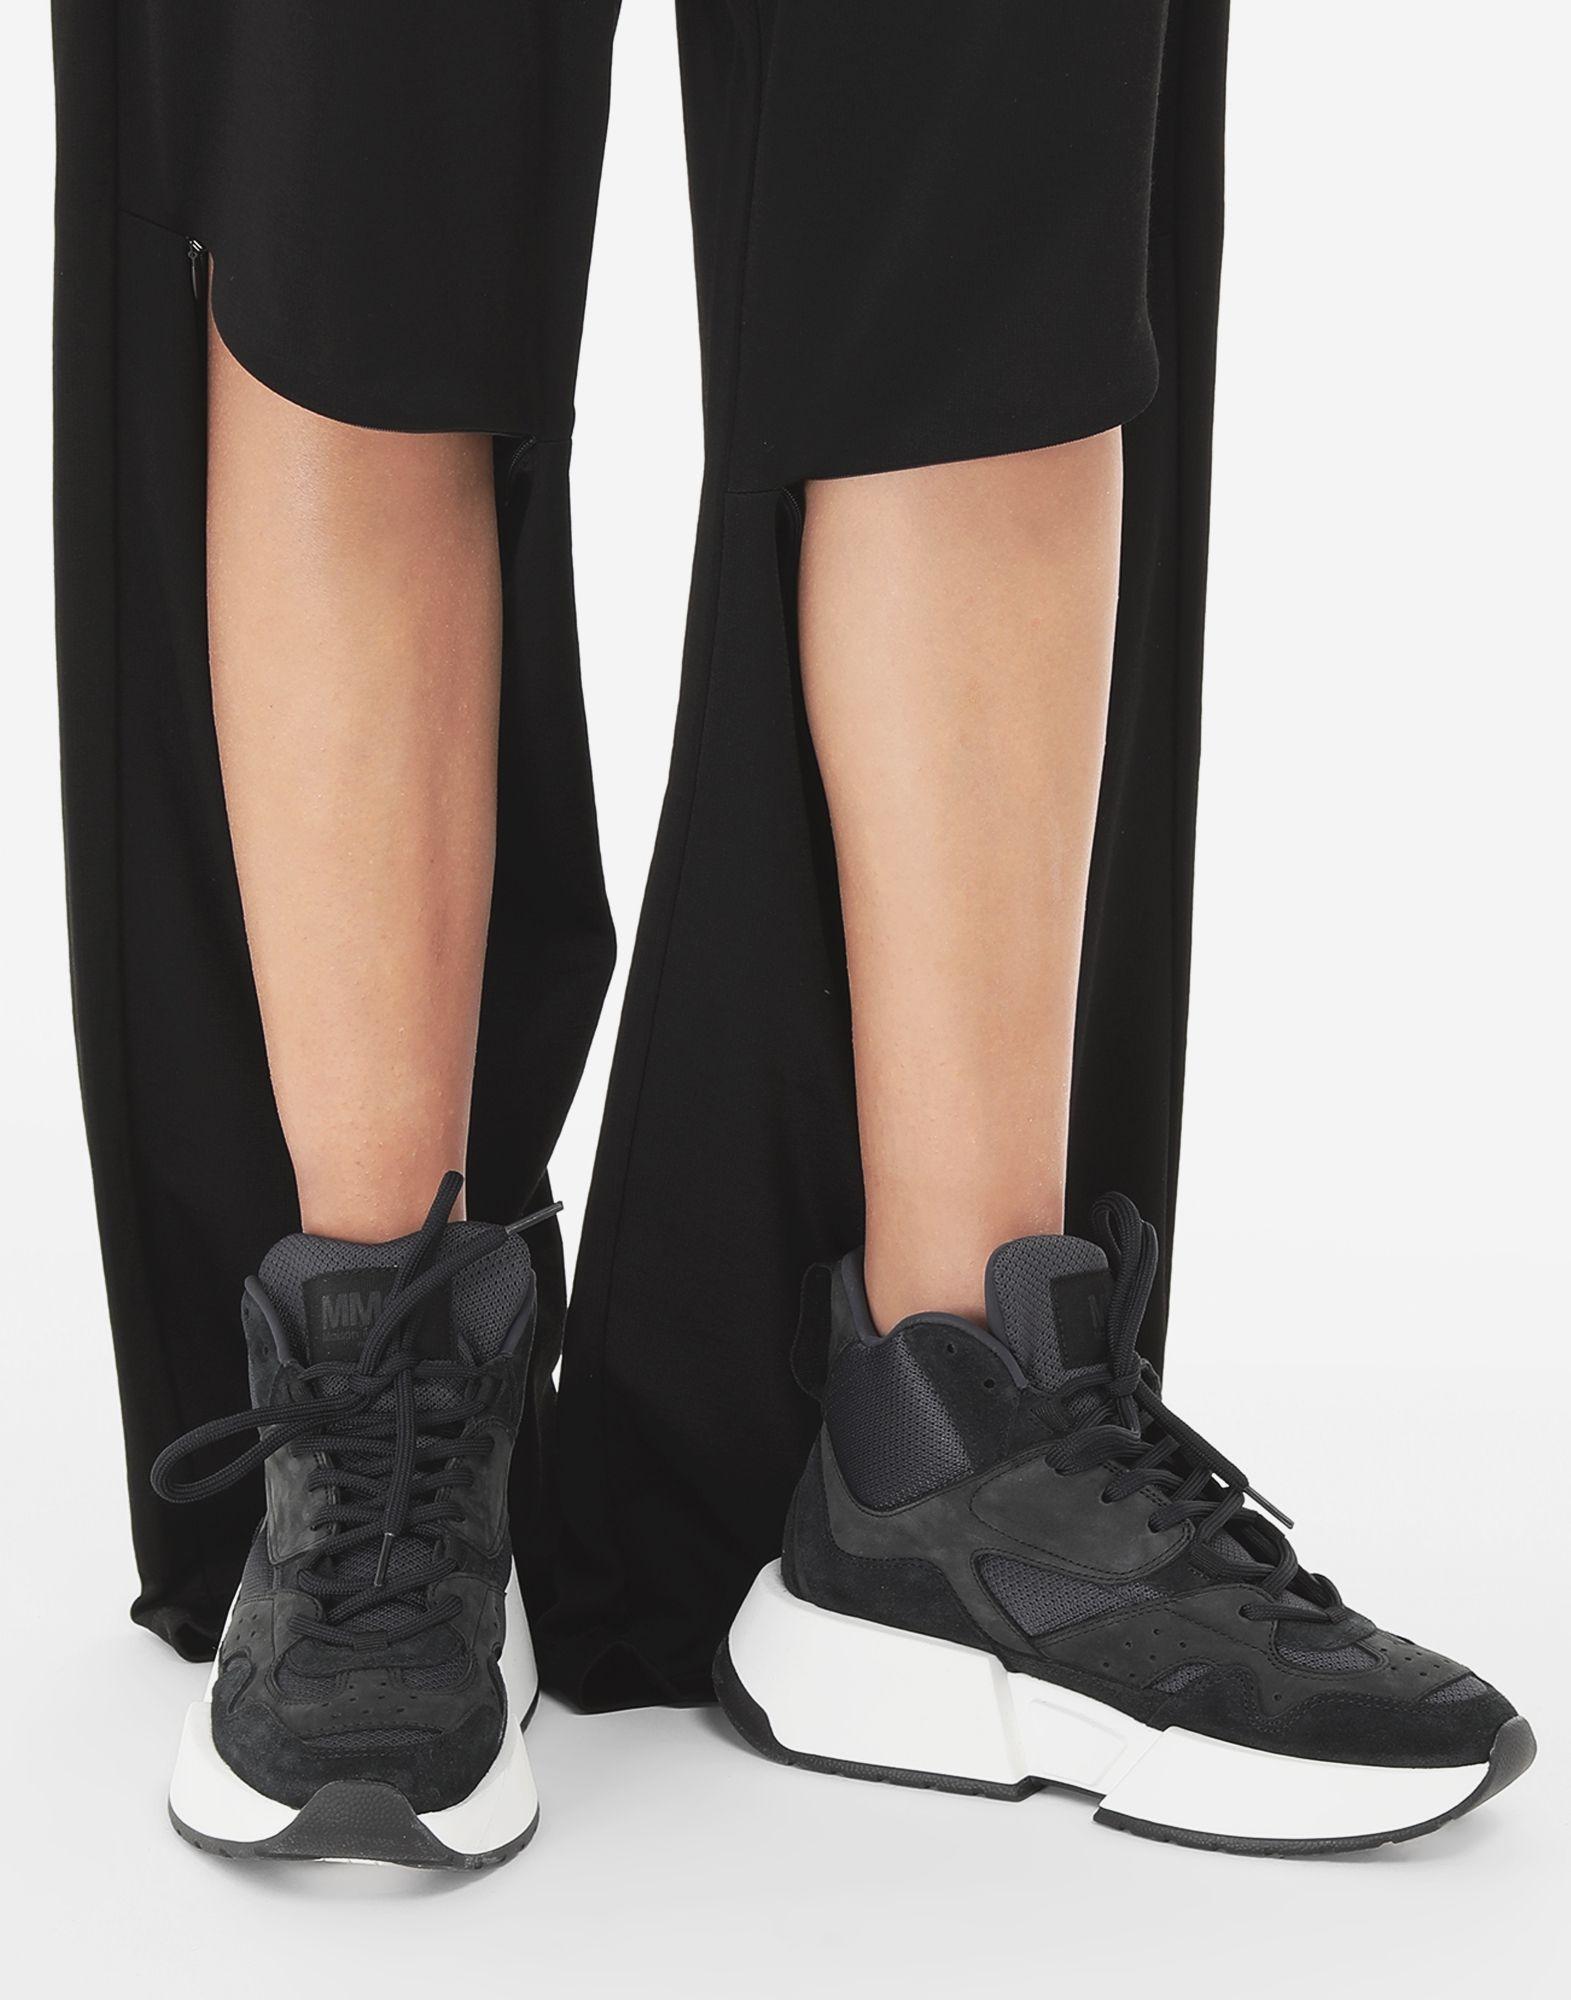 MM6 by Maison Martin Margiela Textured Sneakers in Black - Lyst